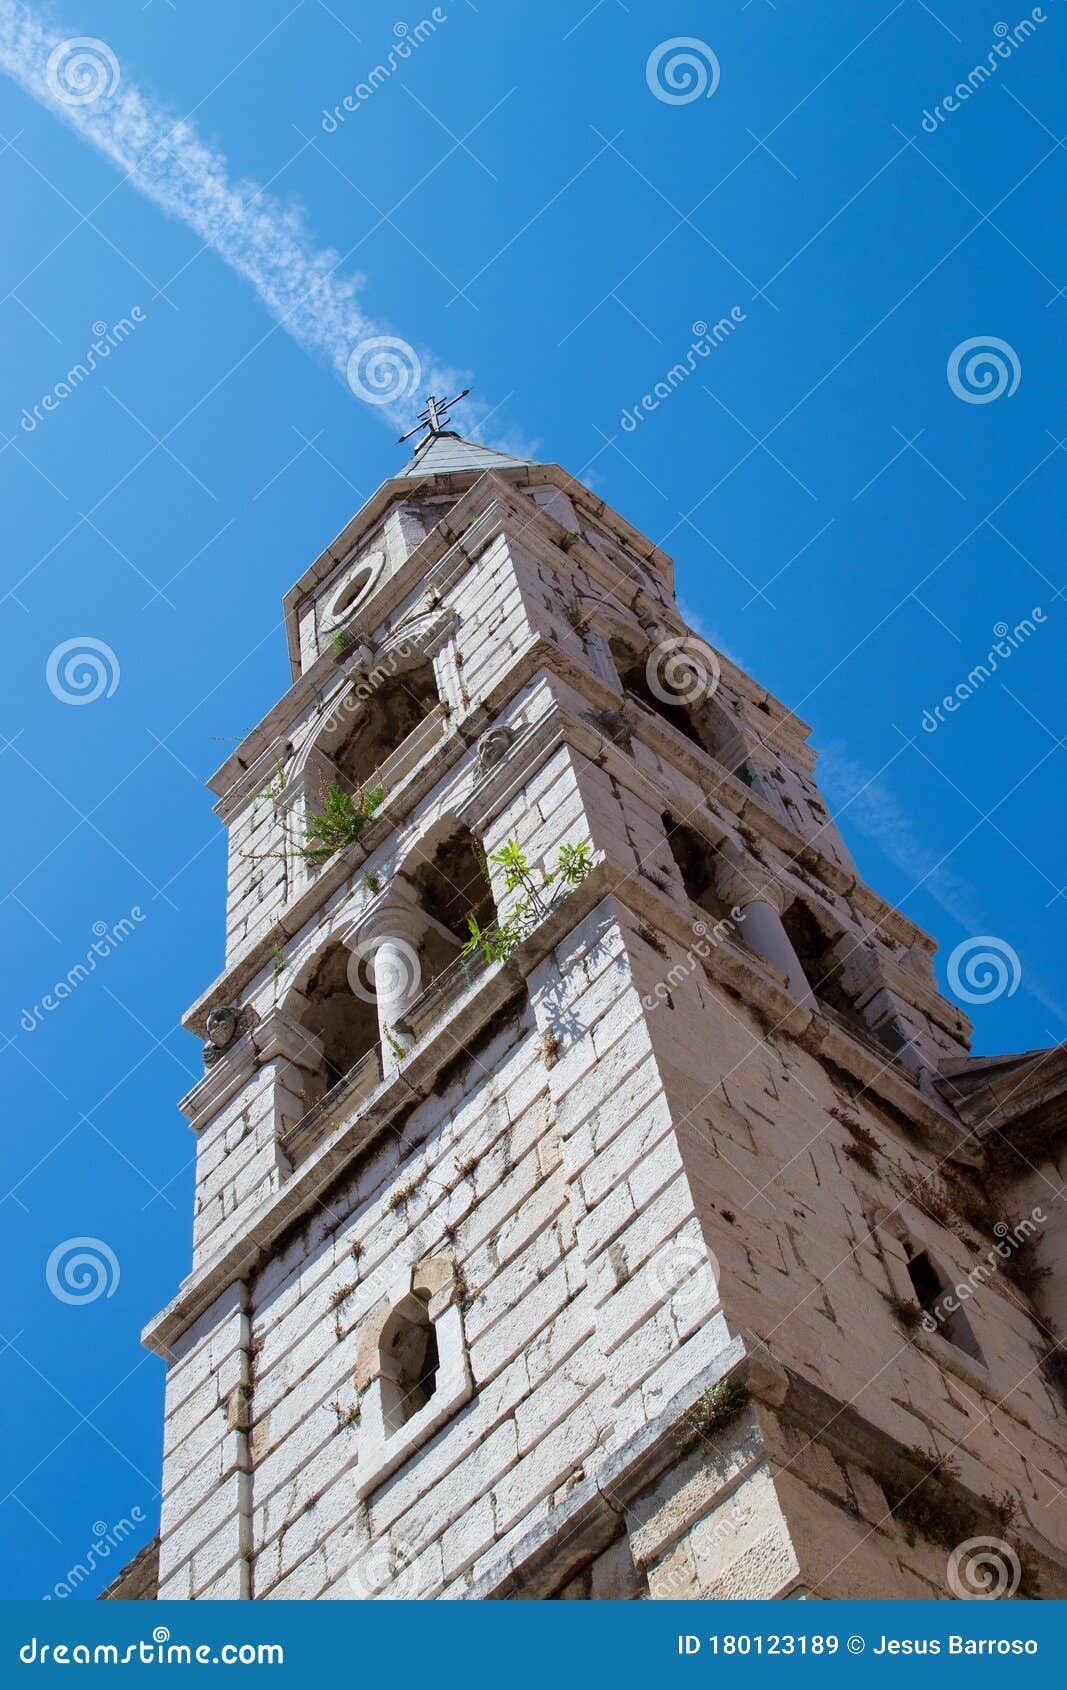 vertical picture of the bell tower of st. elias` church or church of st. elias in the old town of zadar, croatia, with a vapur